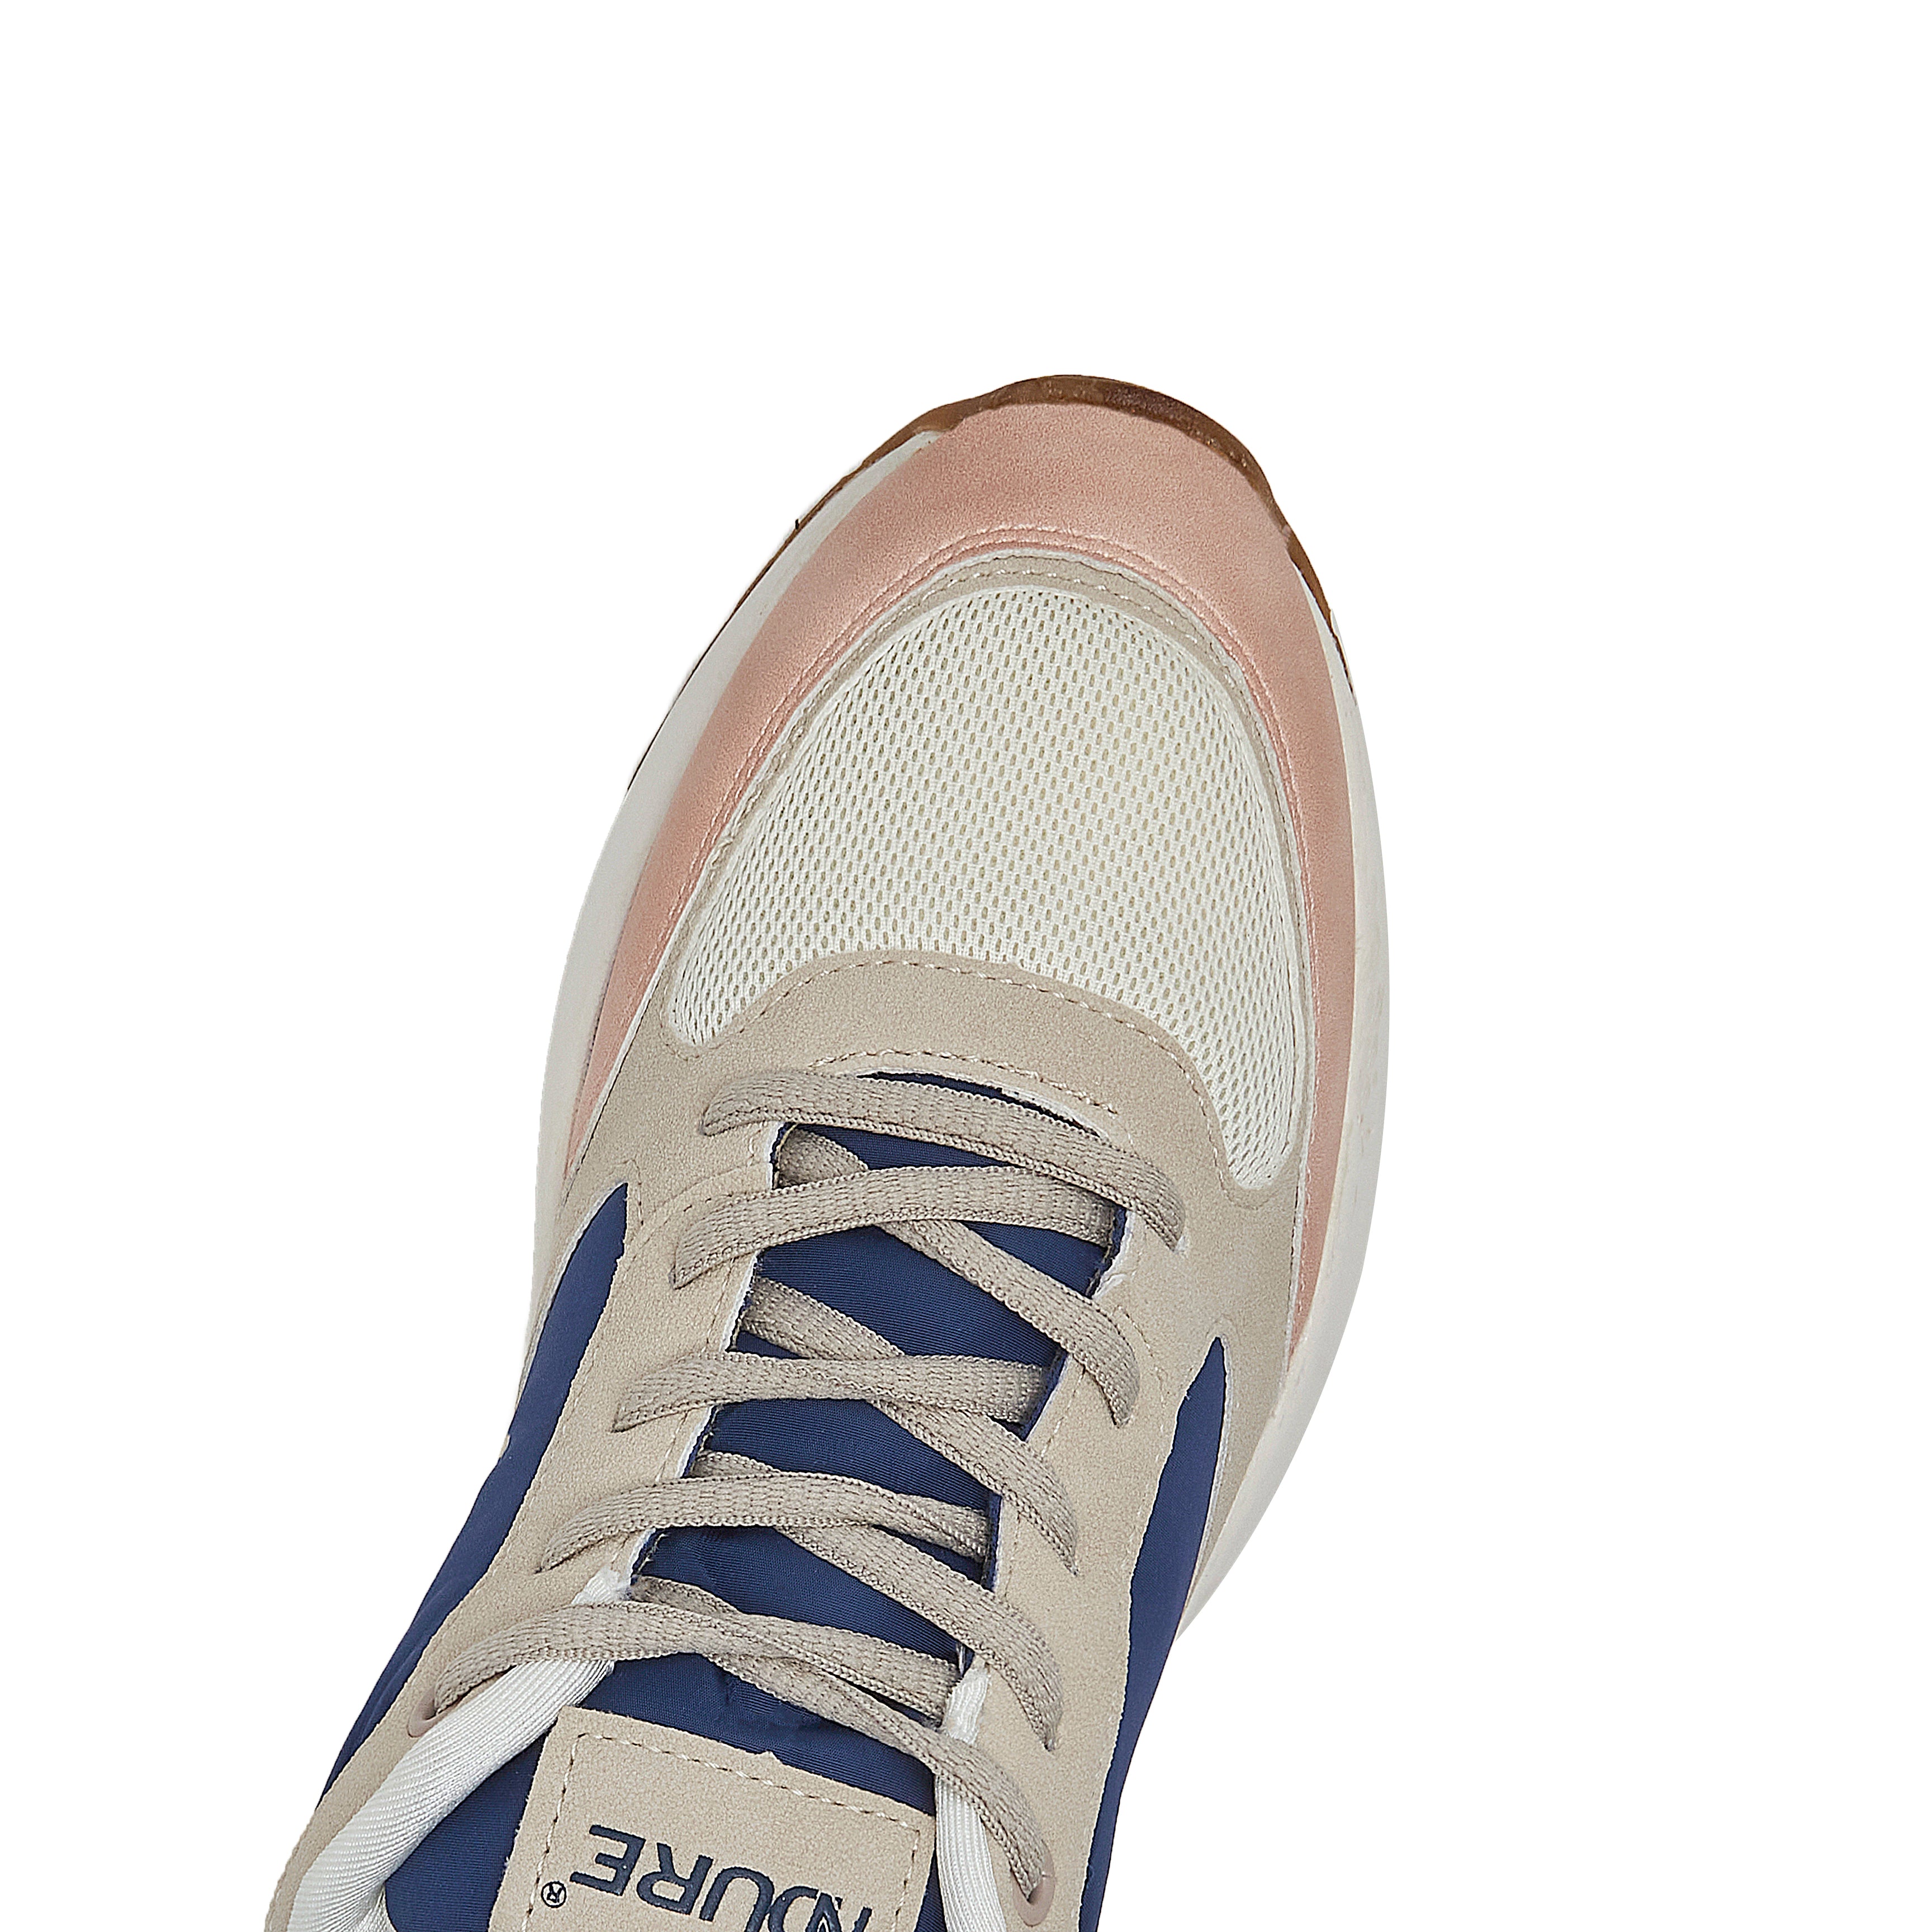 Ndure Athletic Shoes